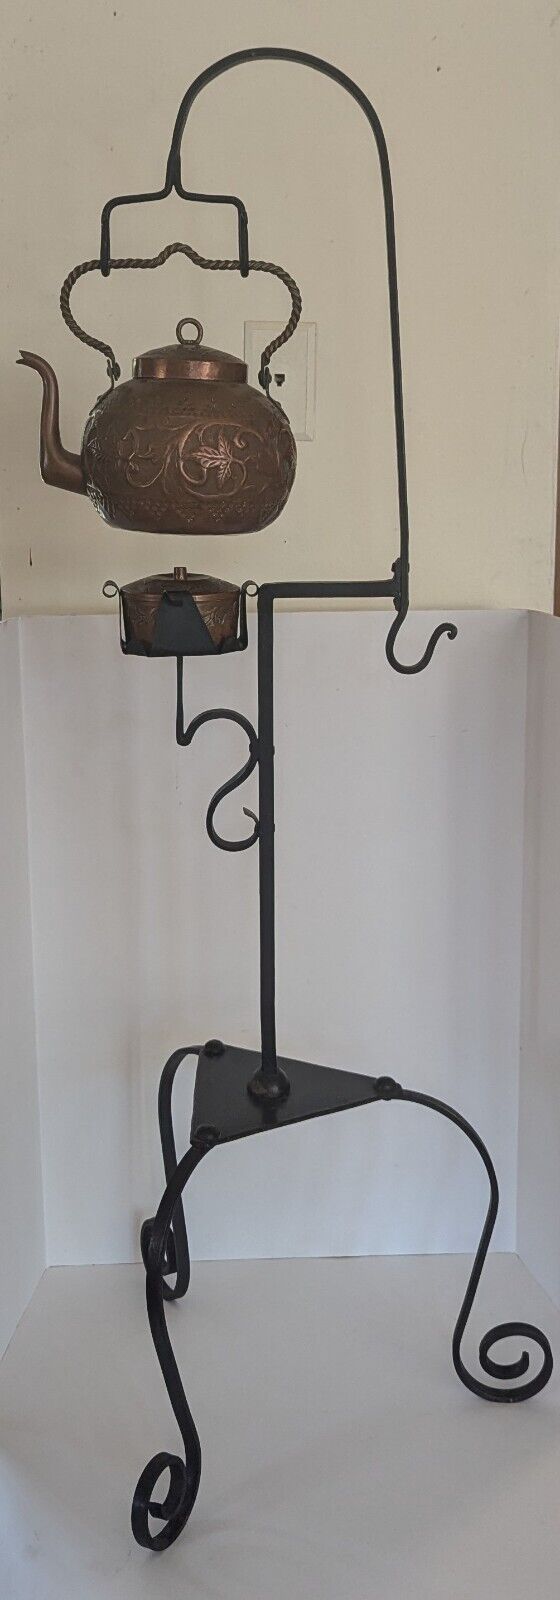 Antique  Heavily Decorated Copper Swinging Spirit Kettle on a Wrought Iron Stand